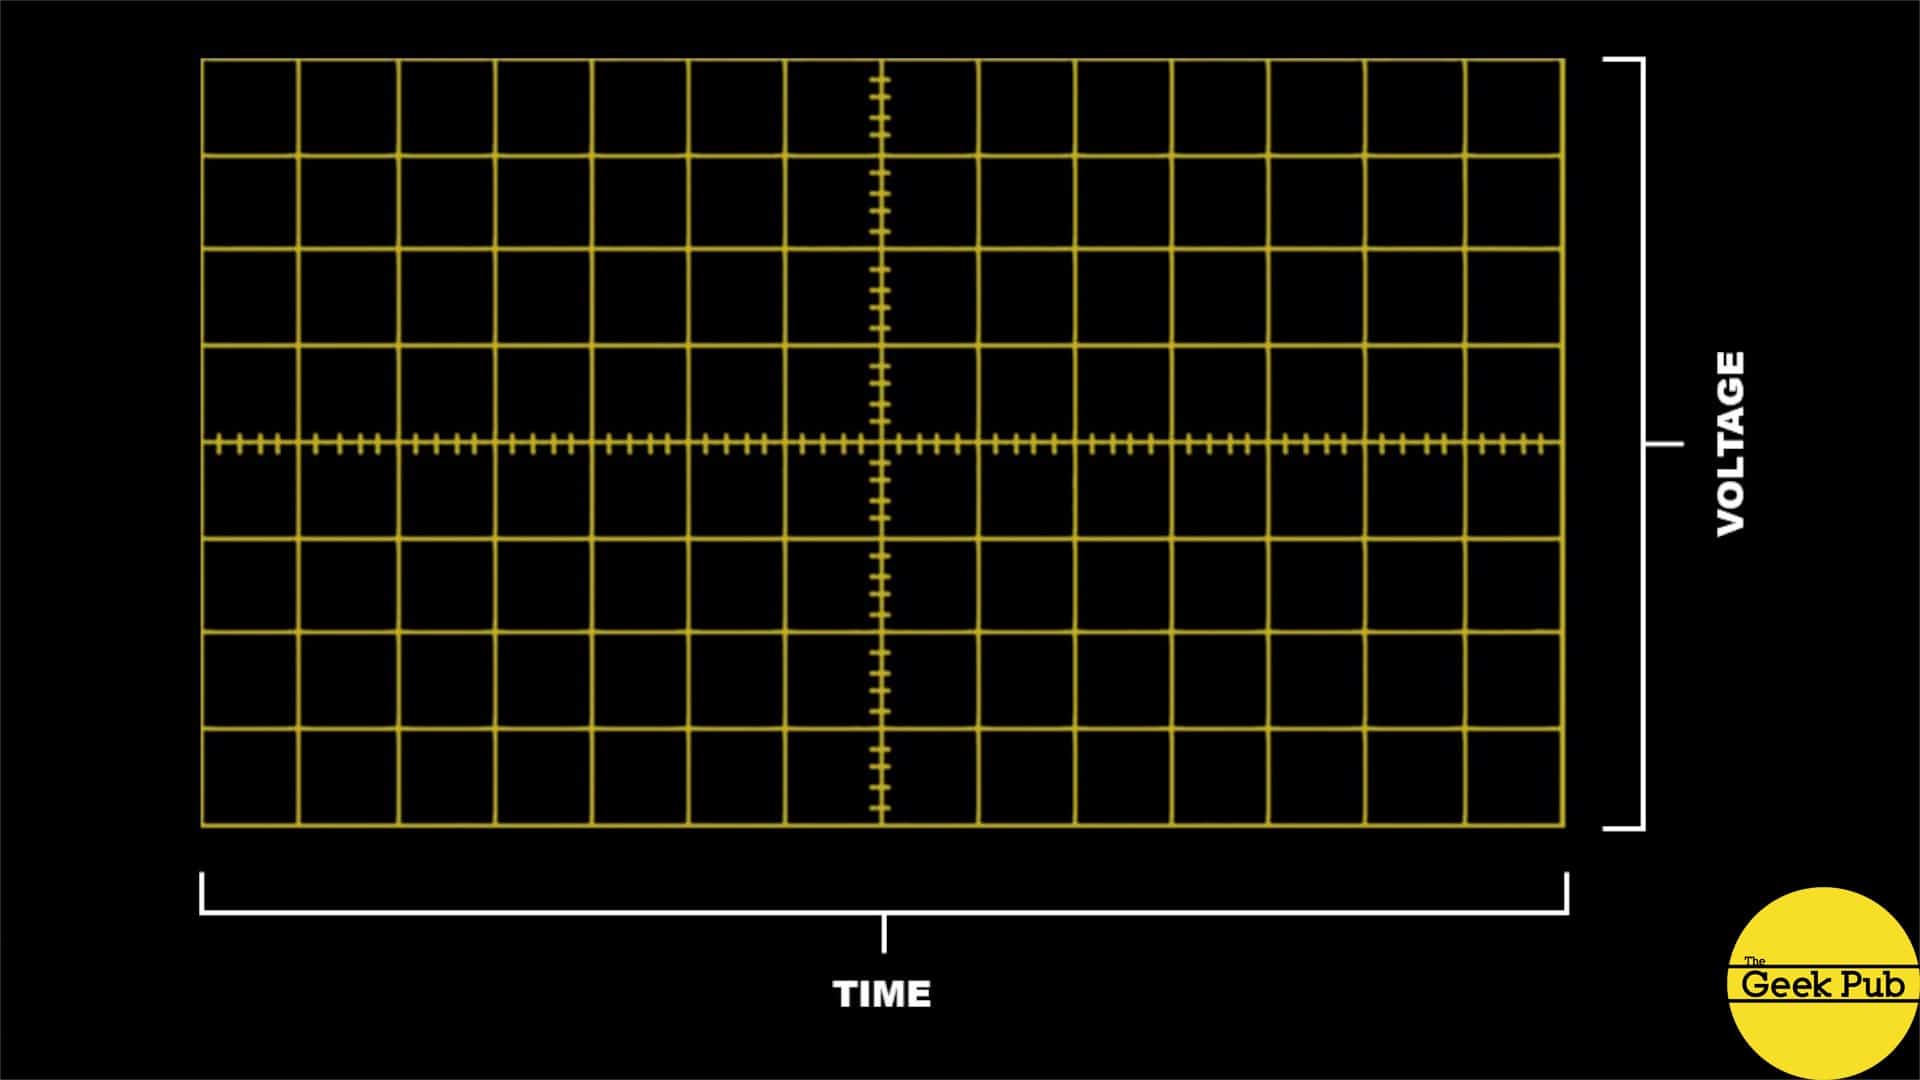 oscilloscope display grid time and voltage scales